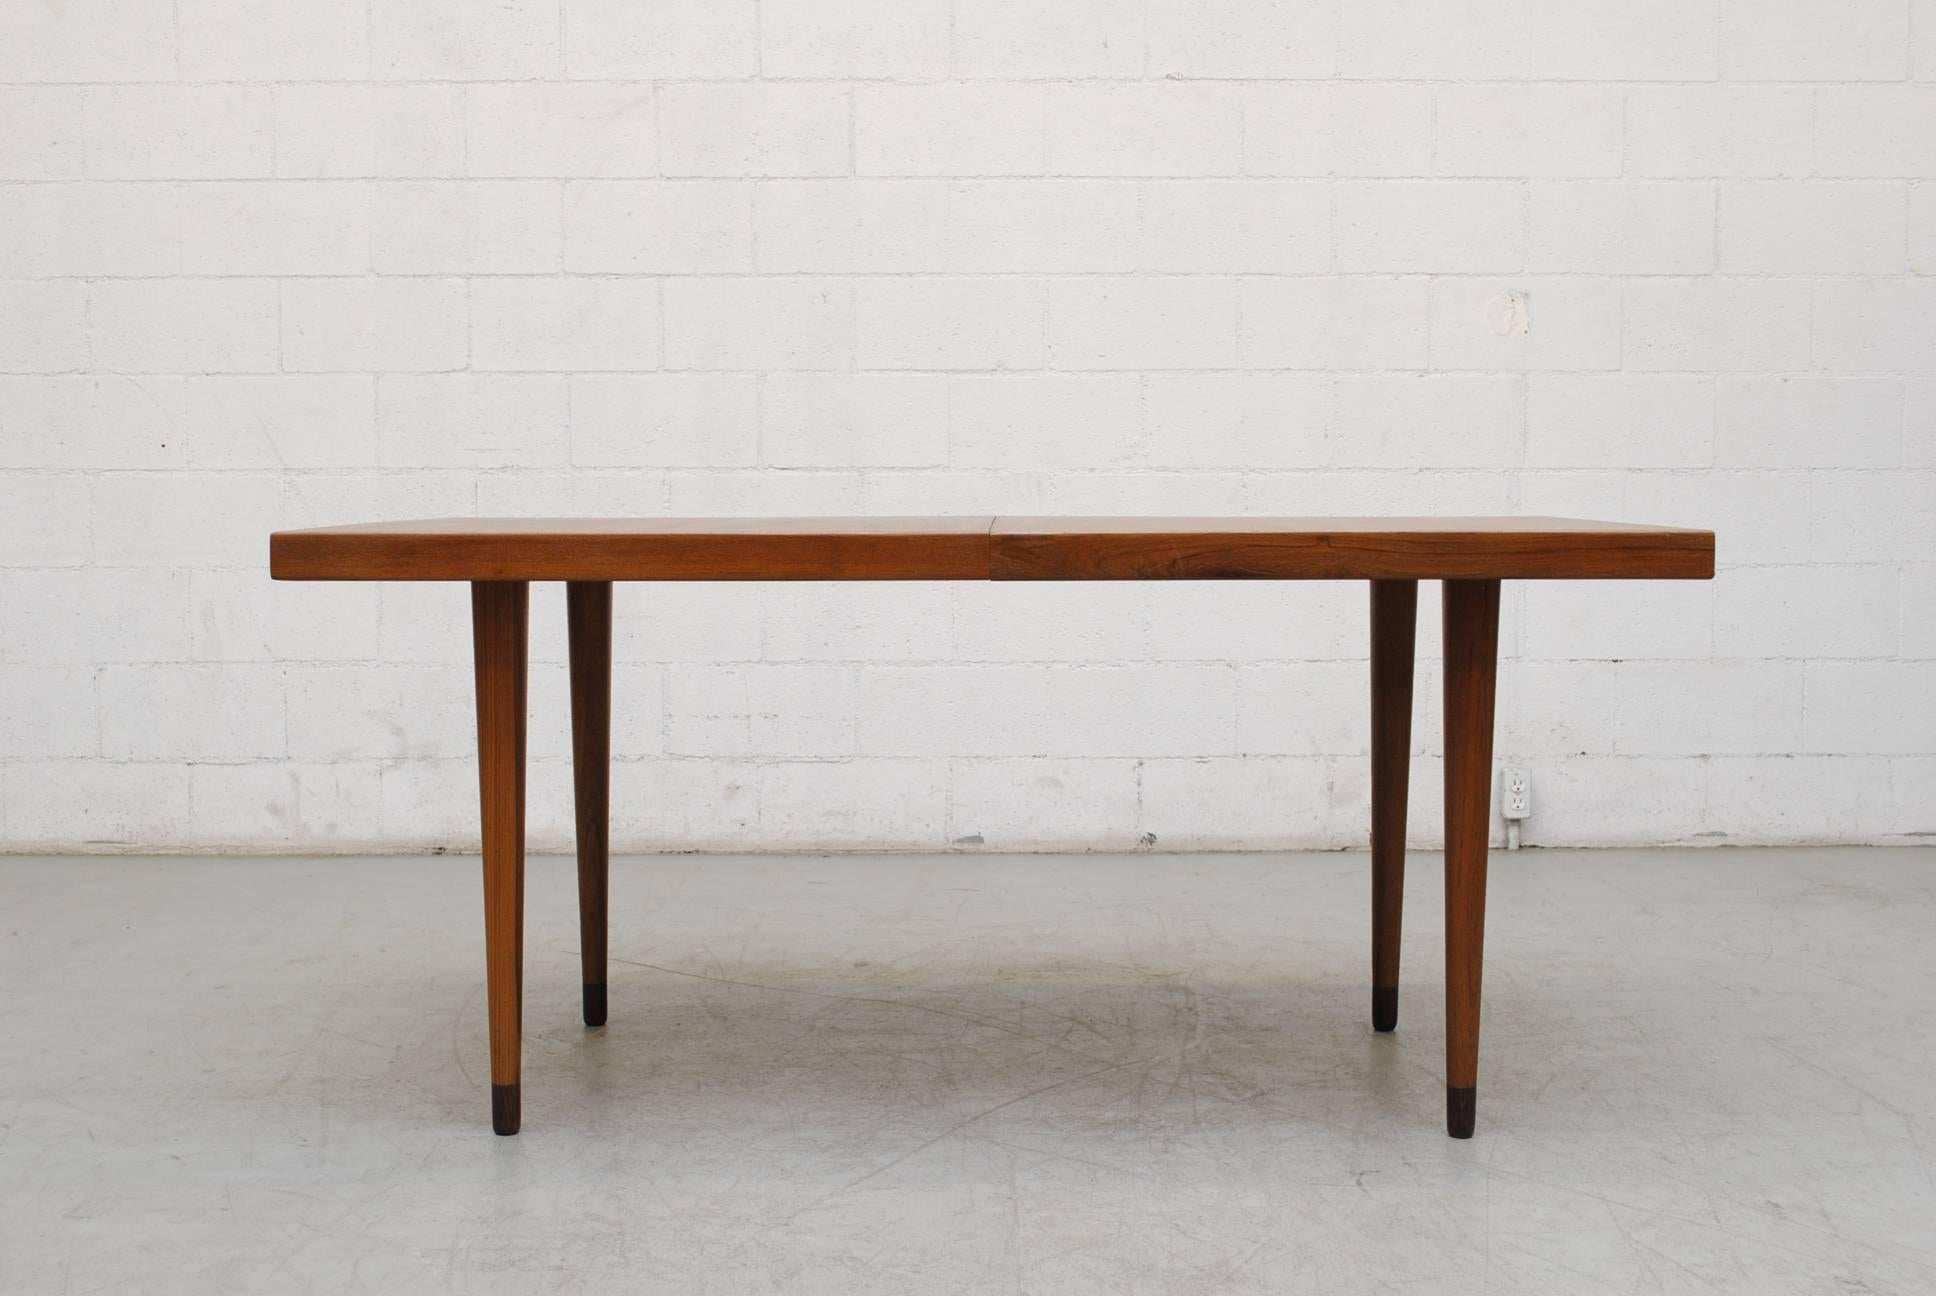 Streamline Danish teak dining table with solid teak tapered legs and hidden extension leaf. In good original condition. Originally low table with removable extensions added. Gorgeous table.